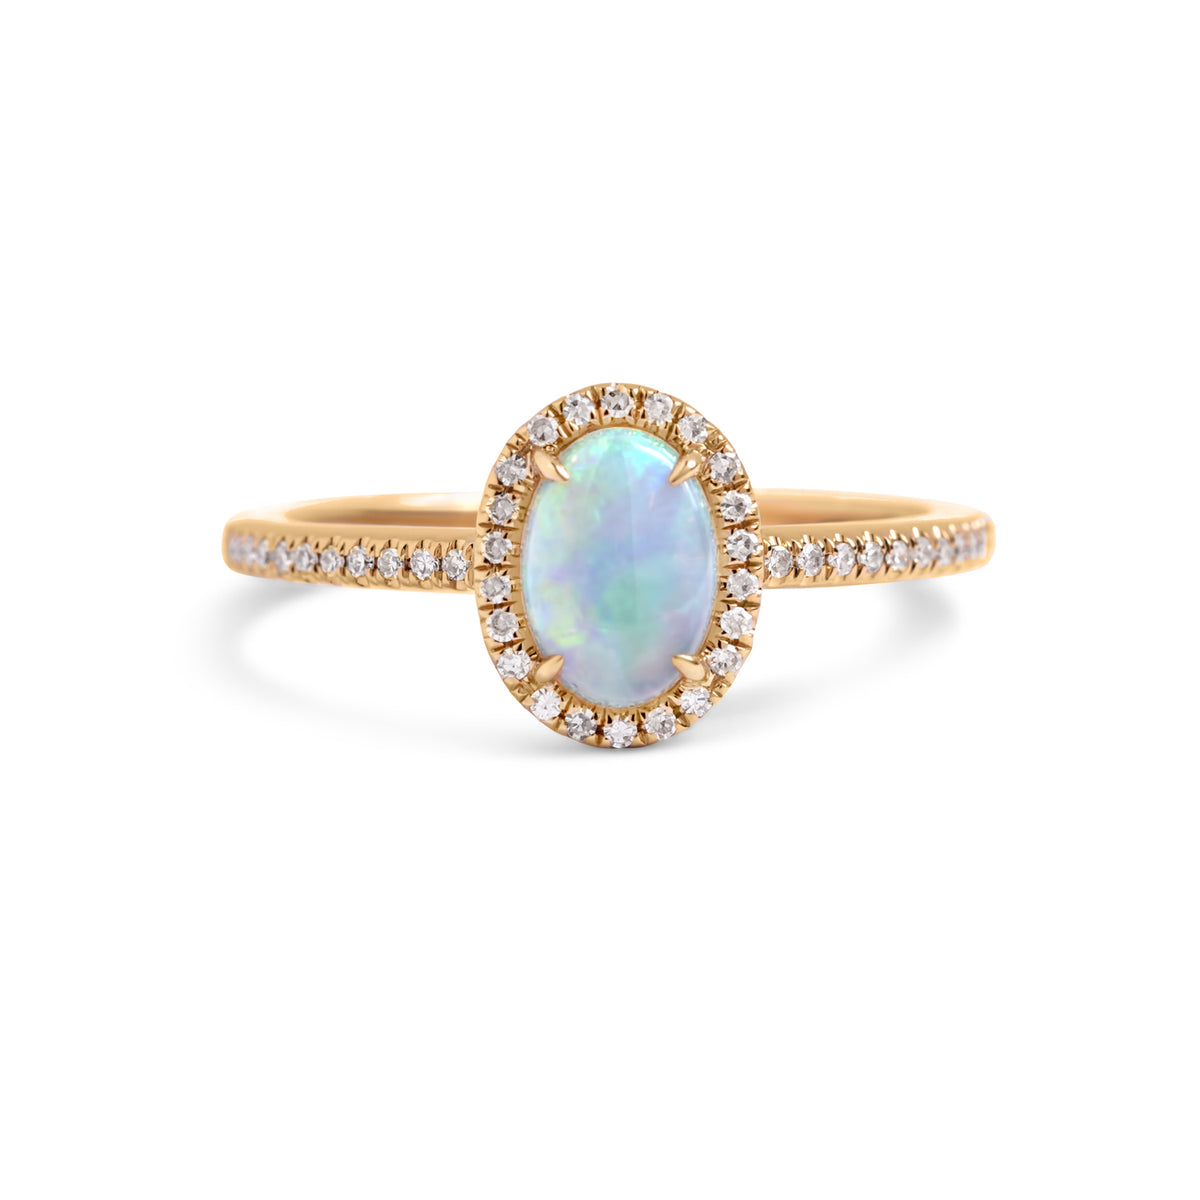 14k yellow gold oval opal ring with diamond halo and diamond band